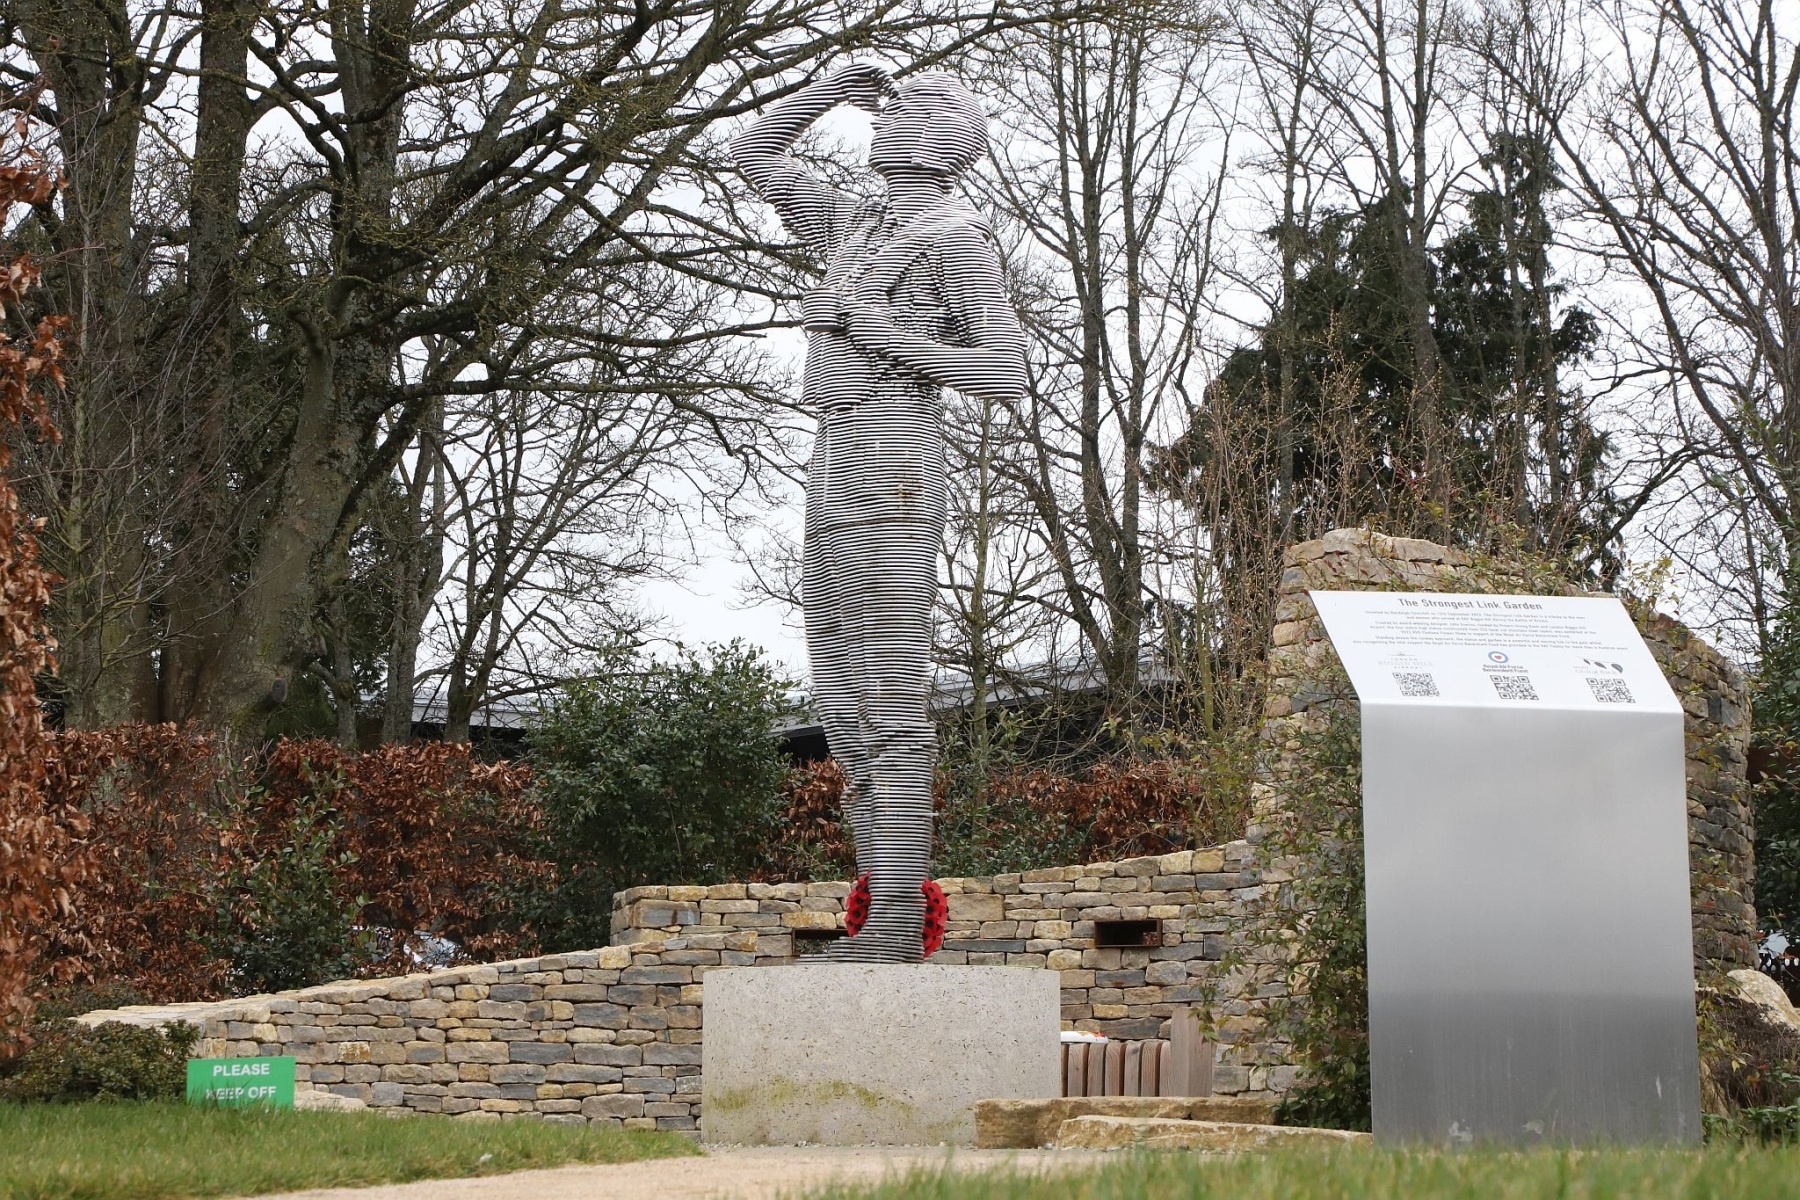 RAF Biggin Hill Memorial "The Strongest Link" featuring a pilot looking to the sky which was unveiled in 2022 to remember the RAF station's contribution to the defence of Great Britain.